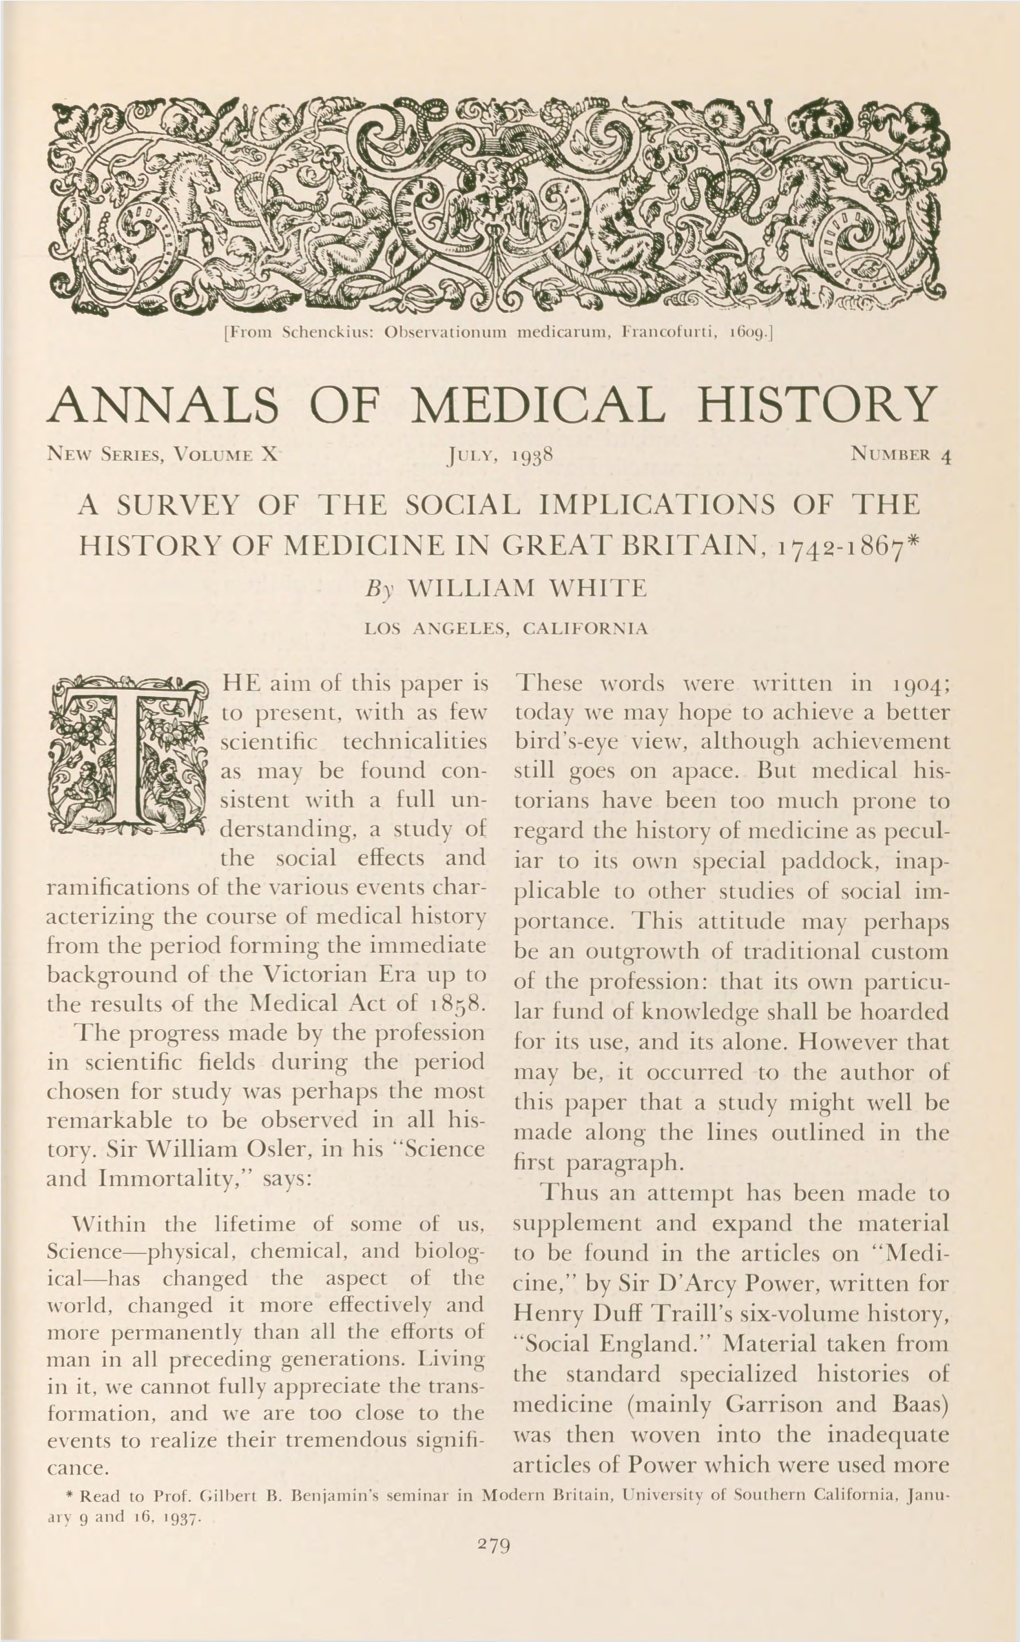 A SURVEY of the SOCIAL IMPLICATIONS of the HISTORY of MEDICINE in GREAT BRITAIN, 1742-1867* by WILLIAM WHITE LOS ANGELES, CALIFORNIA